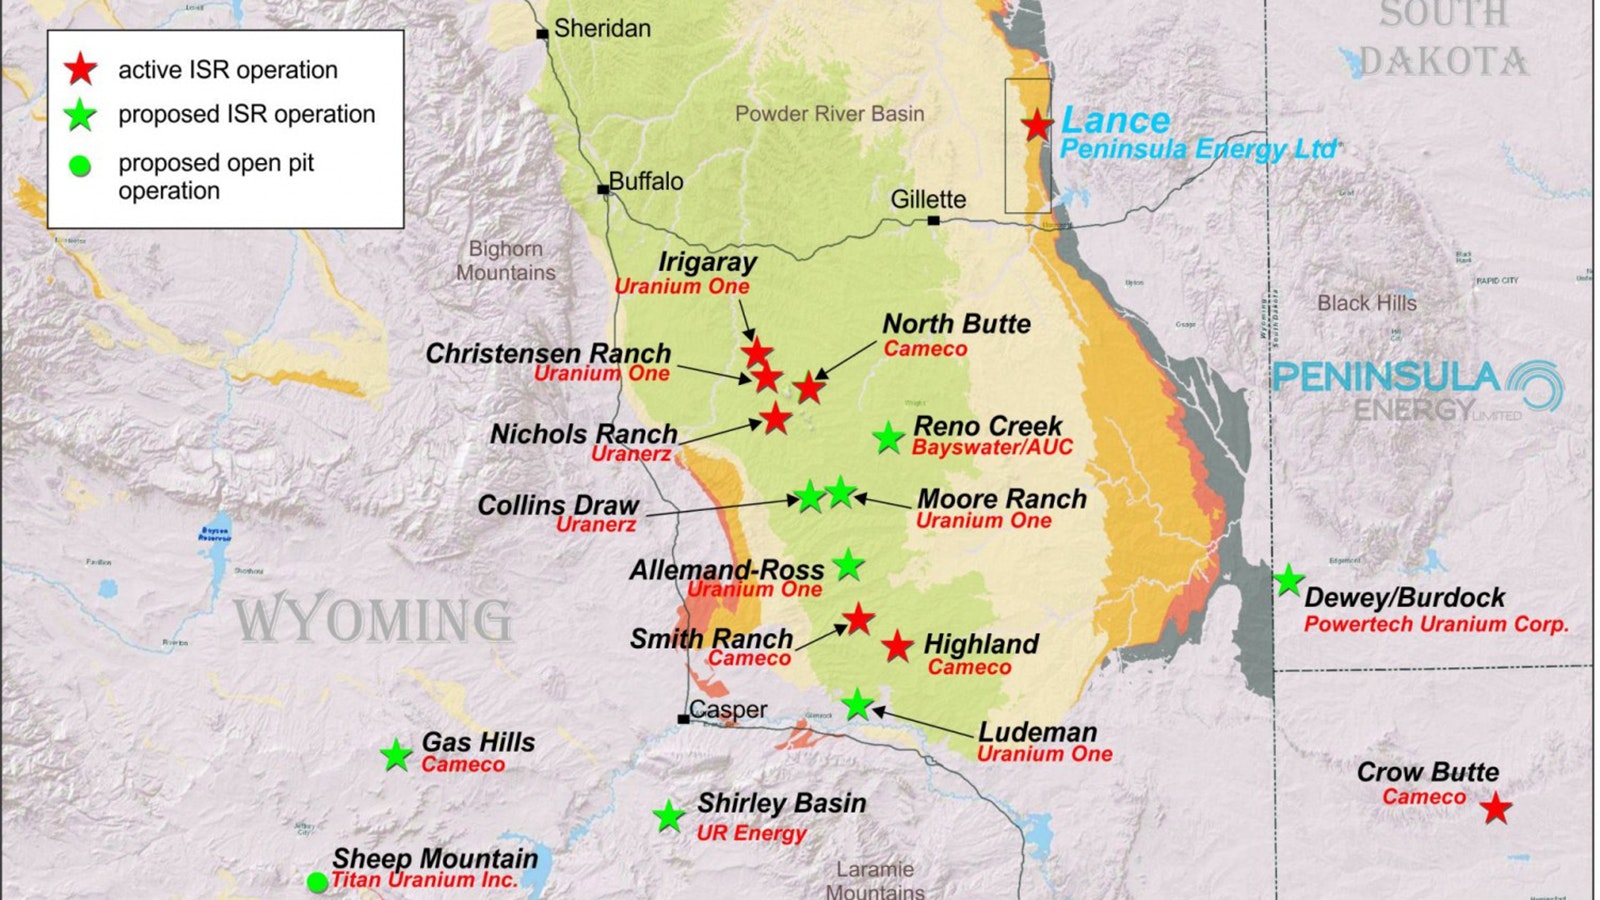 The Lance uranium projects in northeast Wyoming, mostly in the Powder River Basin.